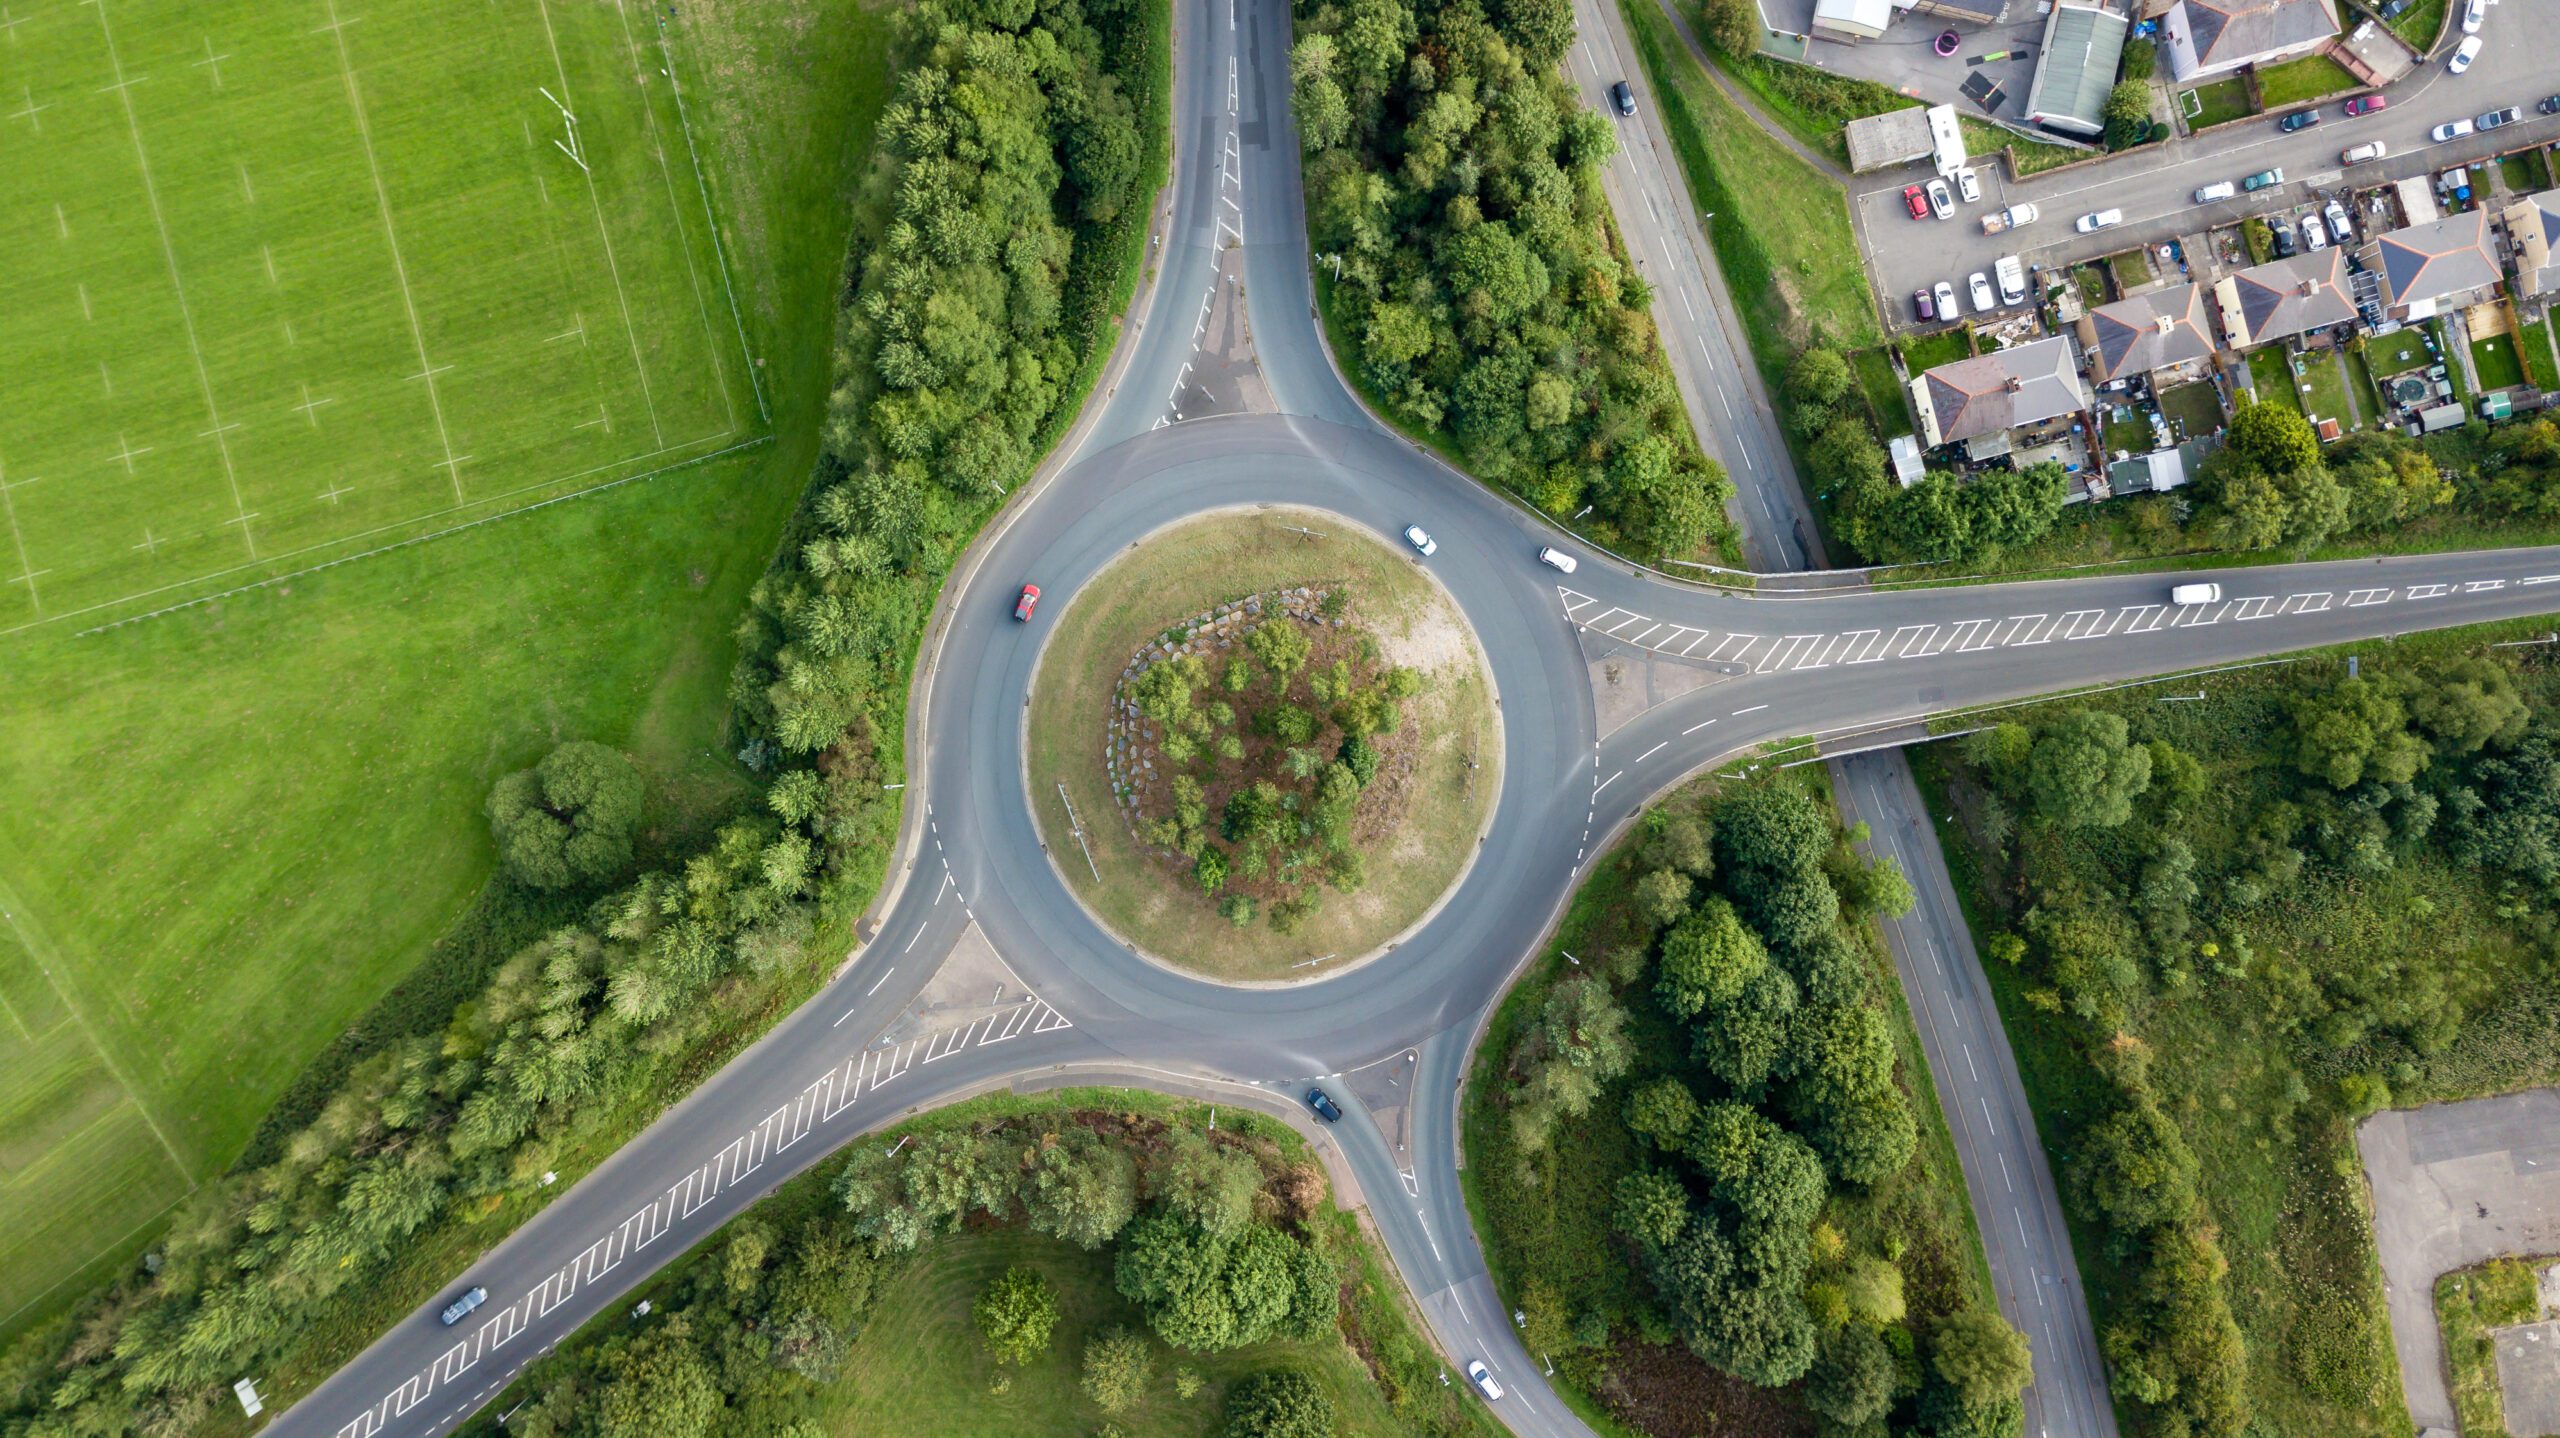 Transport - aerial view of a roundabout in the countryside with cars passing